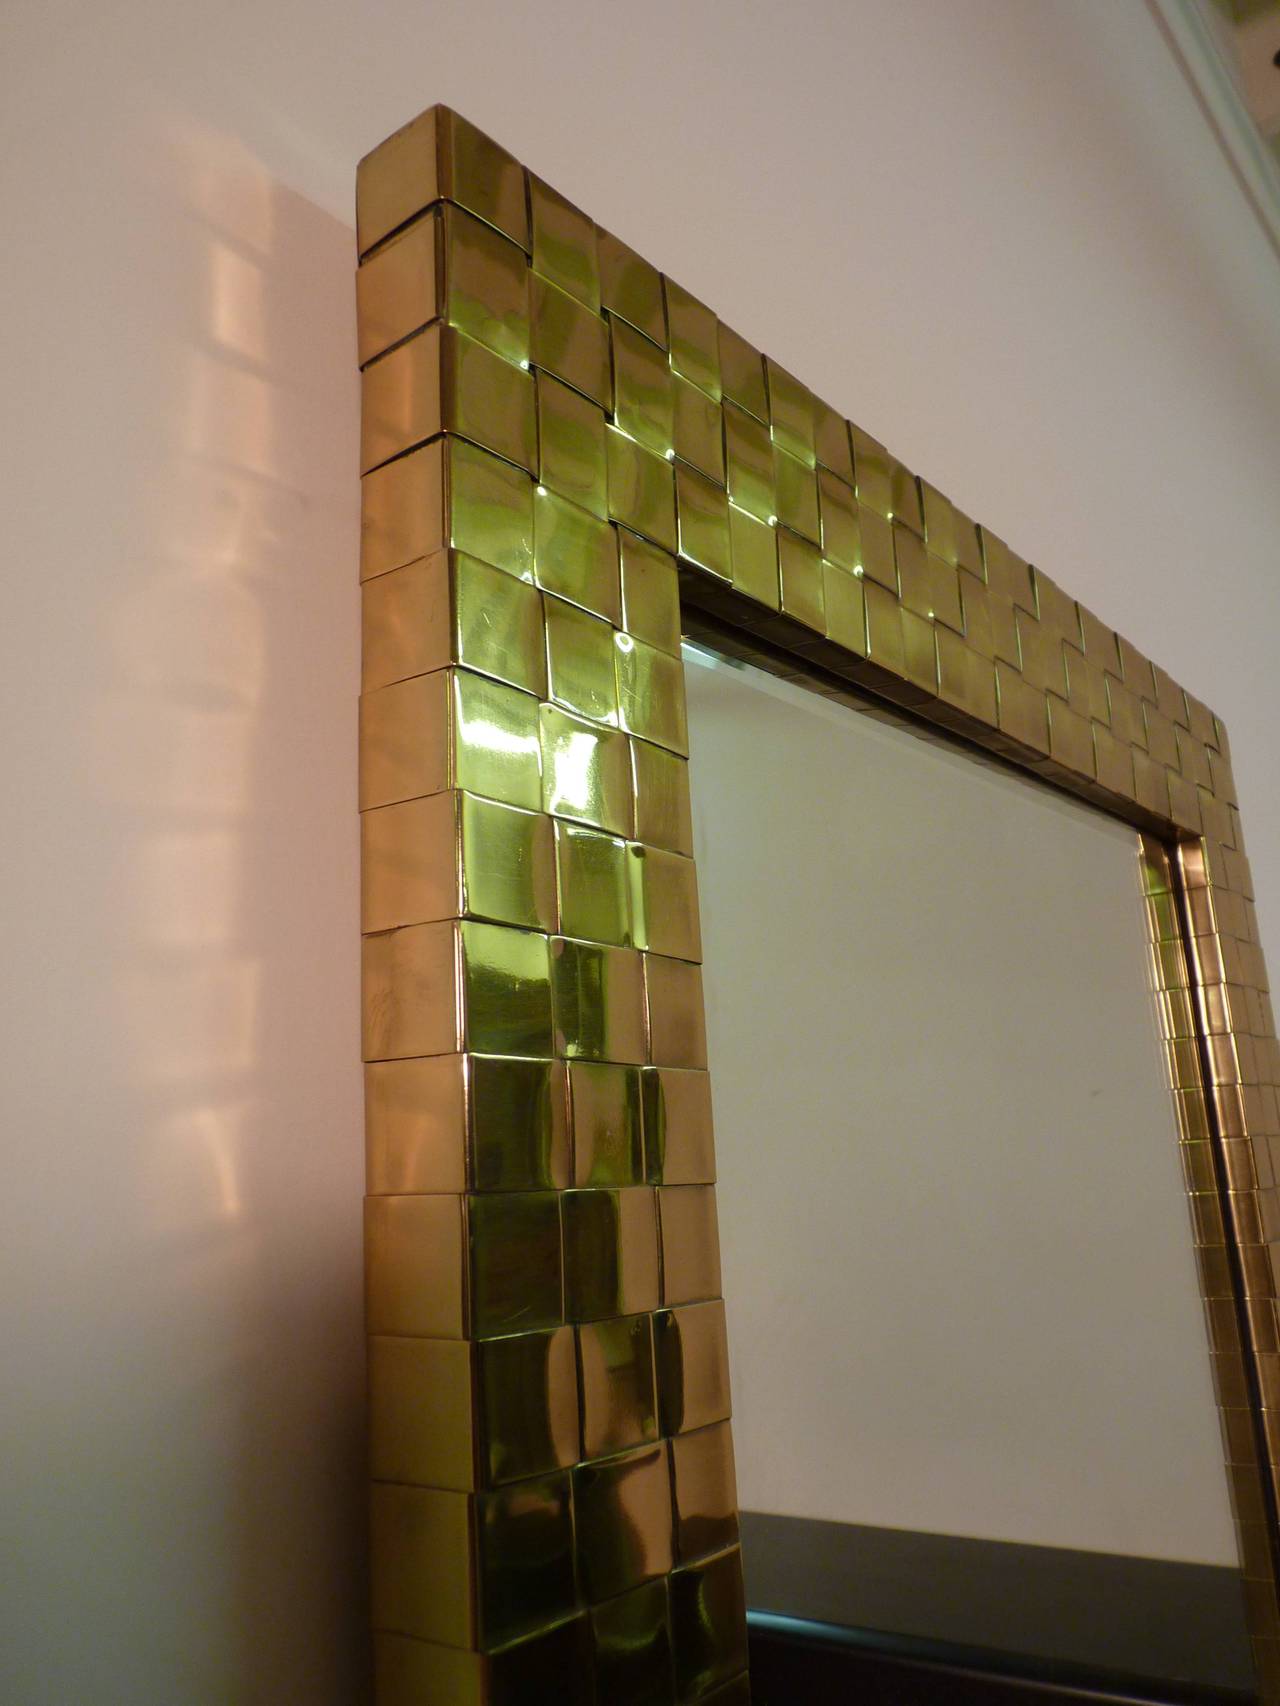 Woven brass mirror by Chapman, circa 1978. Mirrors look great vertically as shown or horizontally over a console or sofa. Original polished brass with clear coat in excellent condition. Signed and dated to rear.